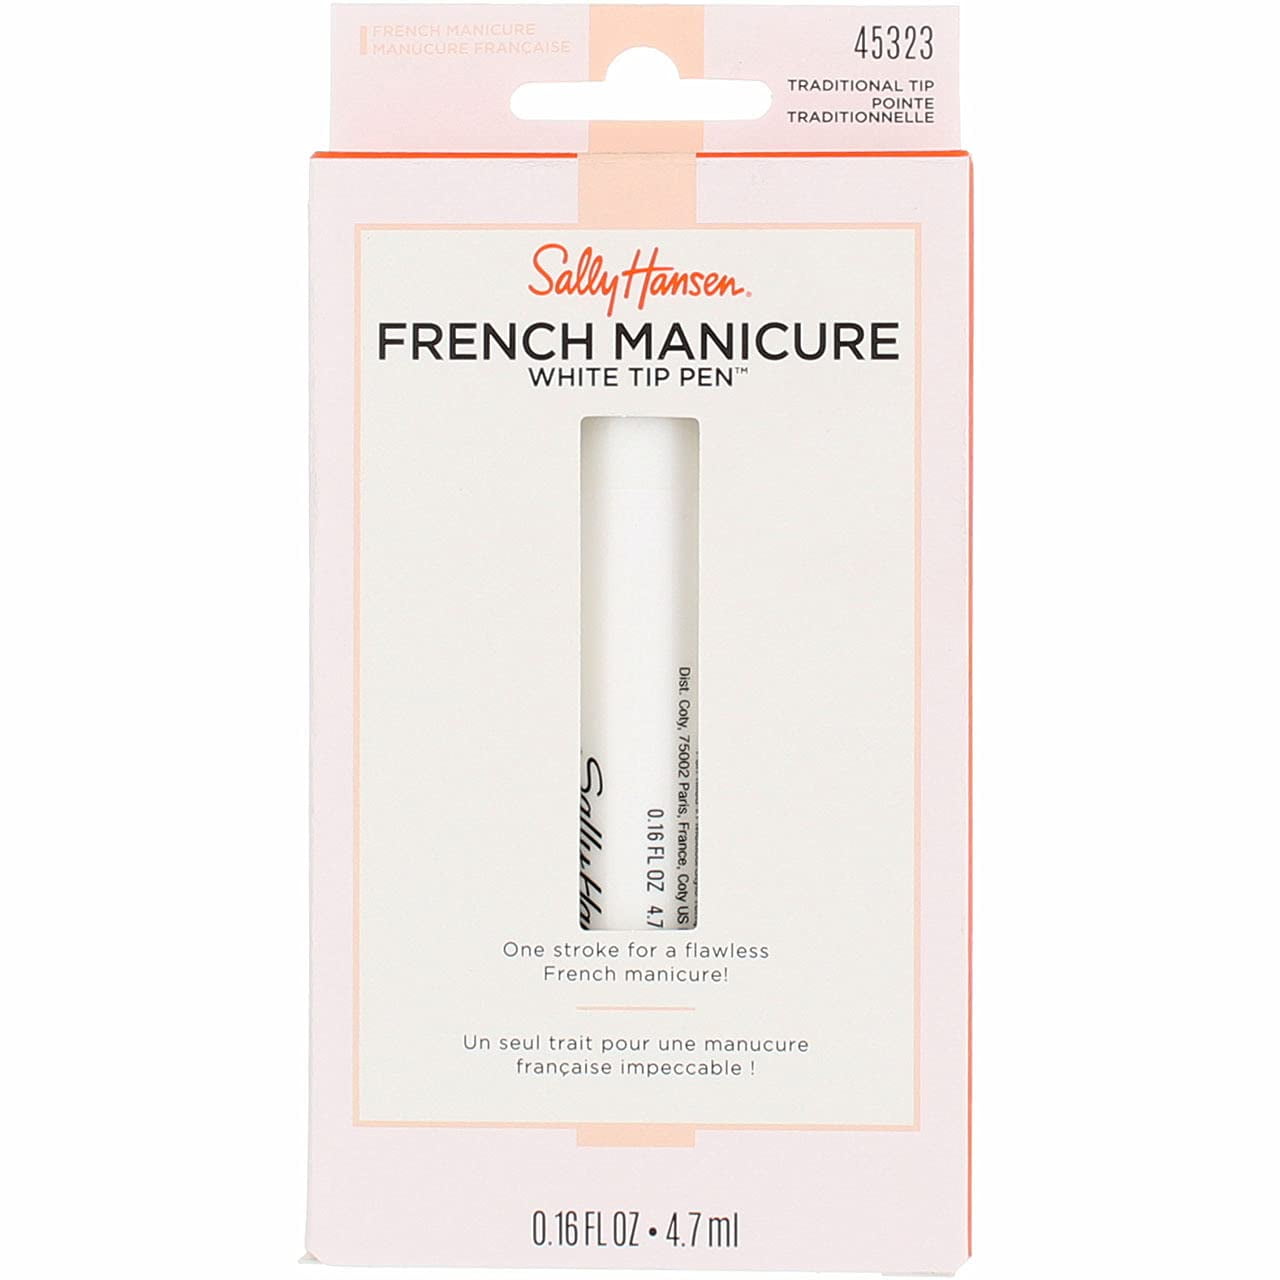 Hairlich French Liner, Manicure Pen, Manicure, Pedicure, White Nail Polish,  Paint Pen, Pen Shape, White Nail Tips, Nail Art, Nail Styling :  : Beauty